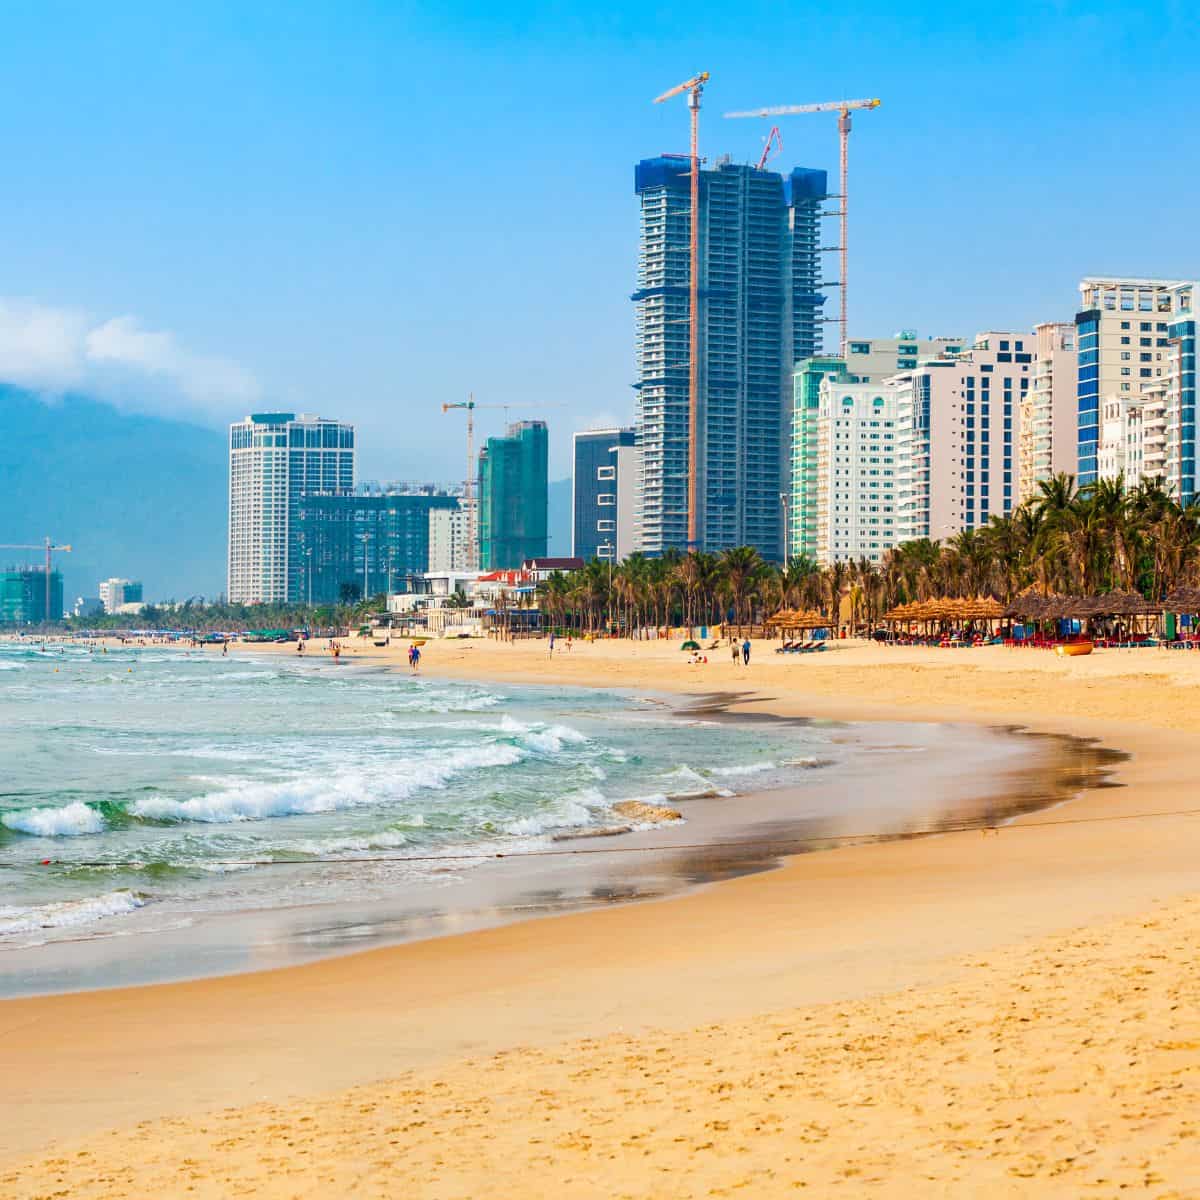 A beach with tall buildings in the background, offering the best food in Danang.